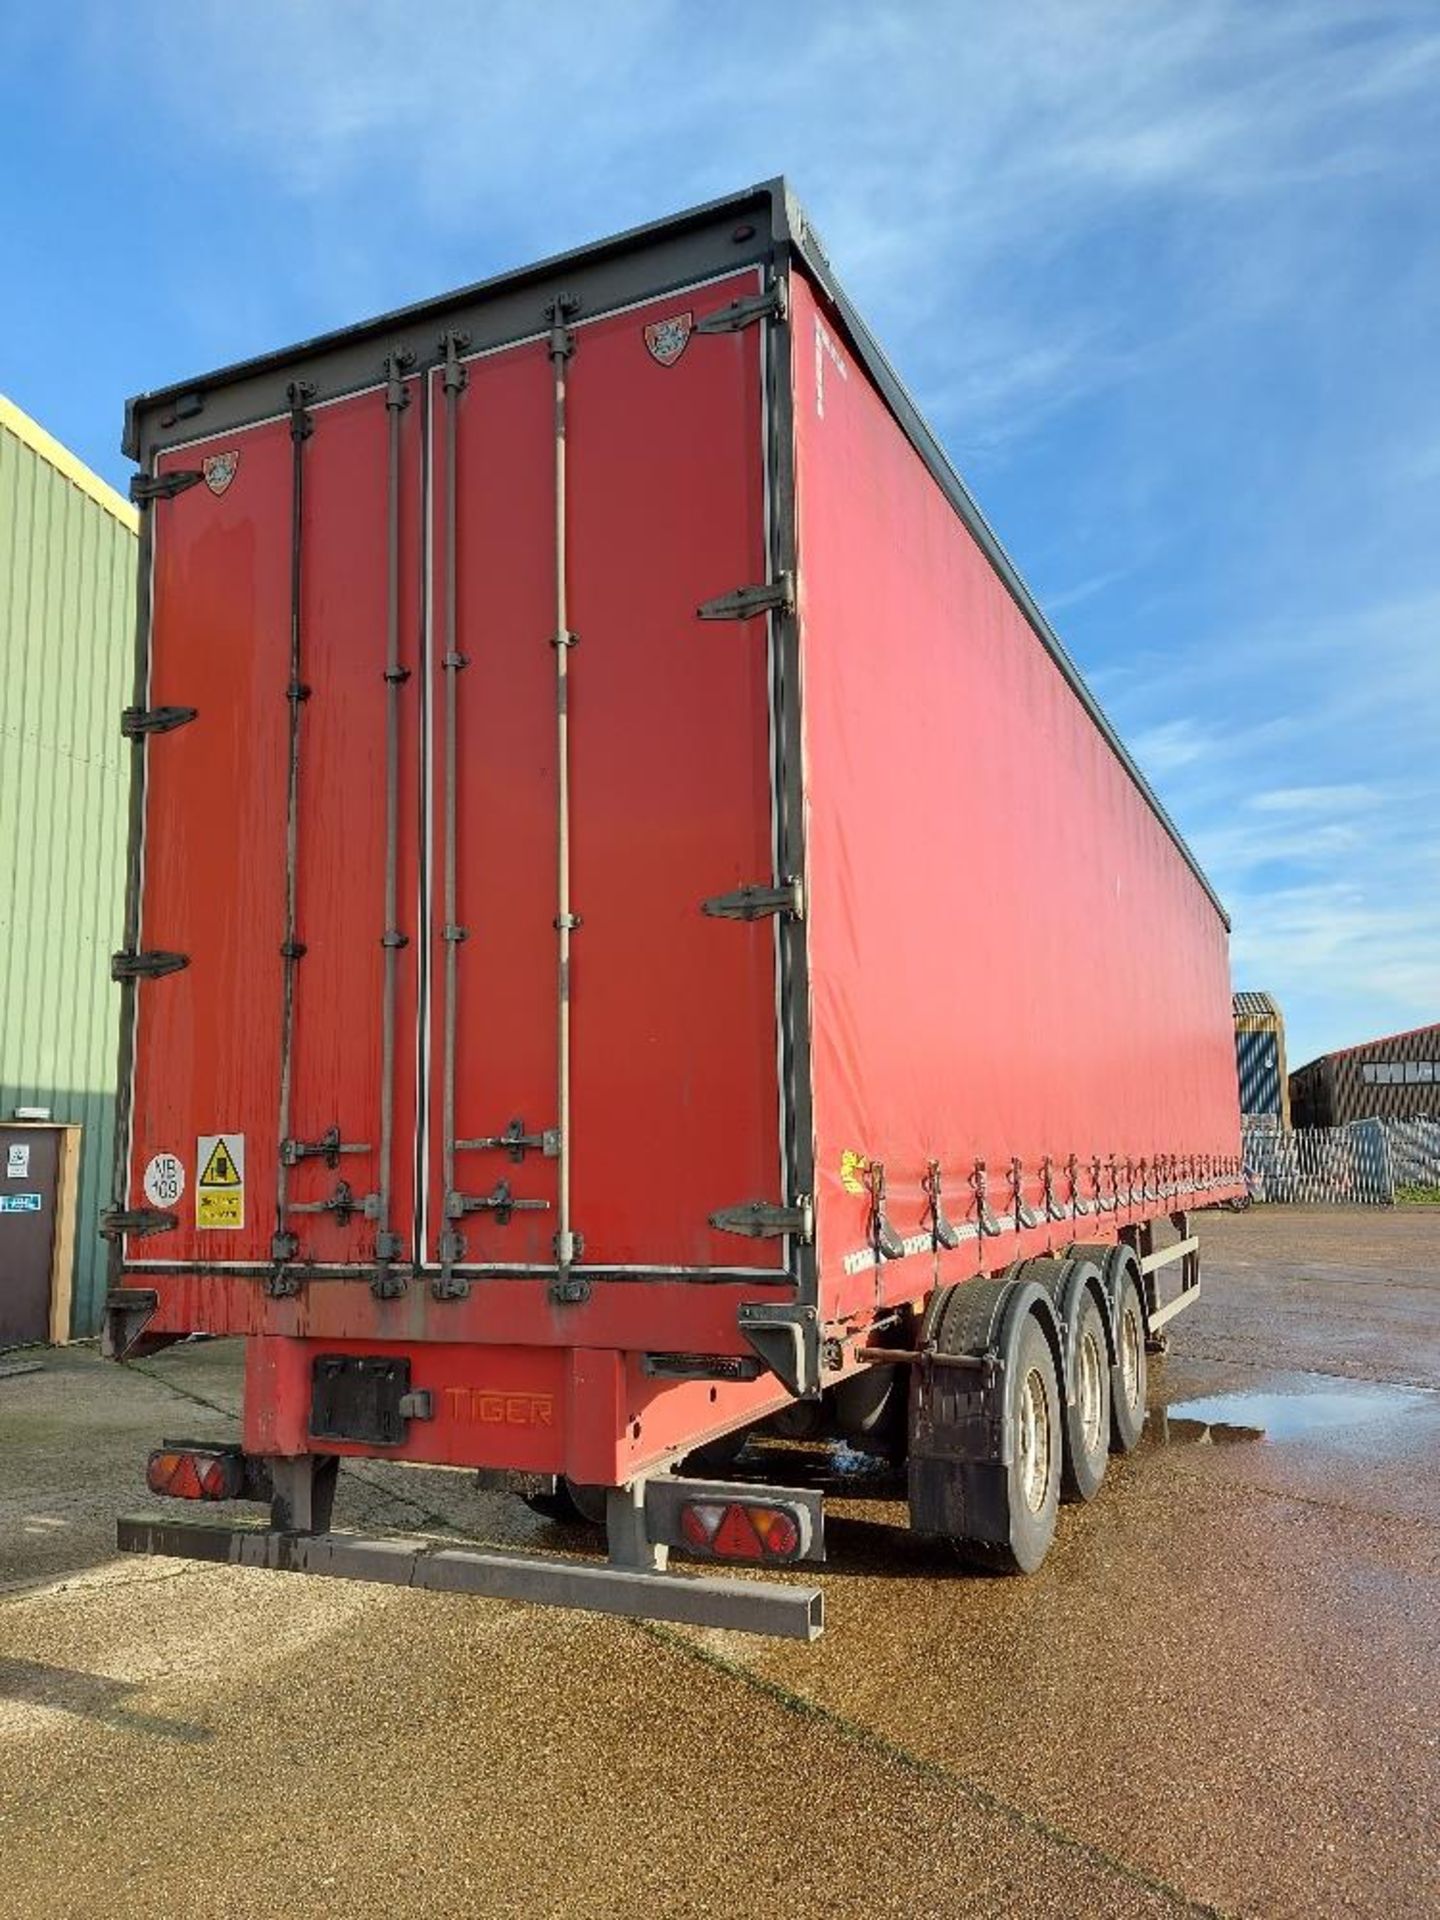 Tiger Tri-Axle 13.7m Curtain Side Trailer Unit - Image 4 of 8